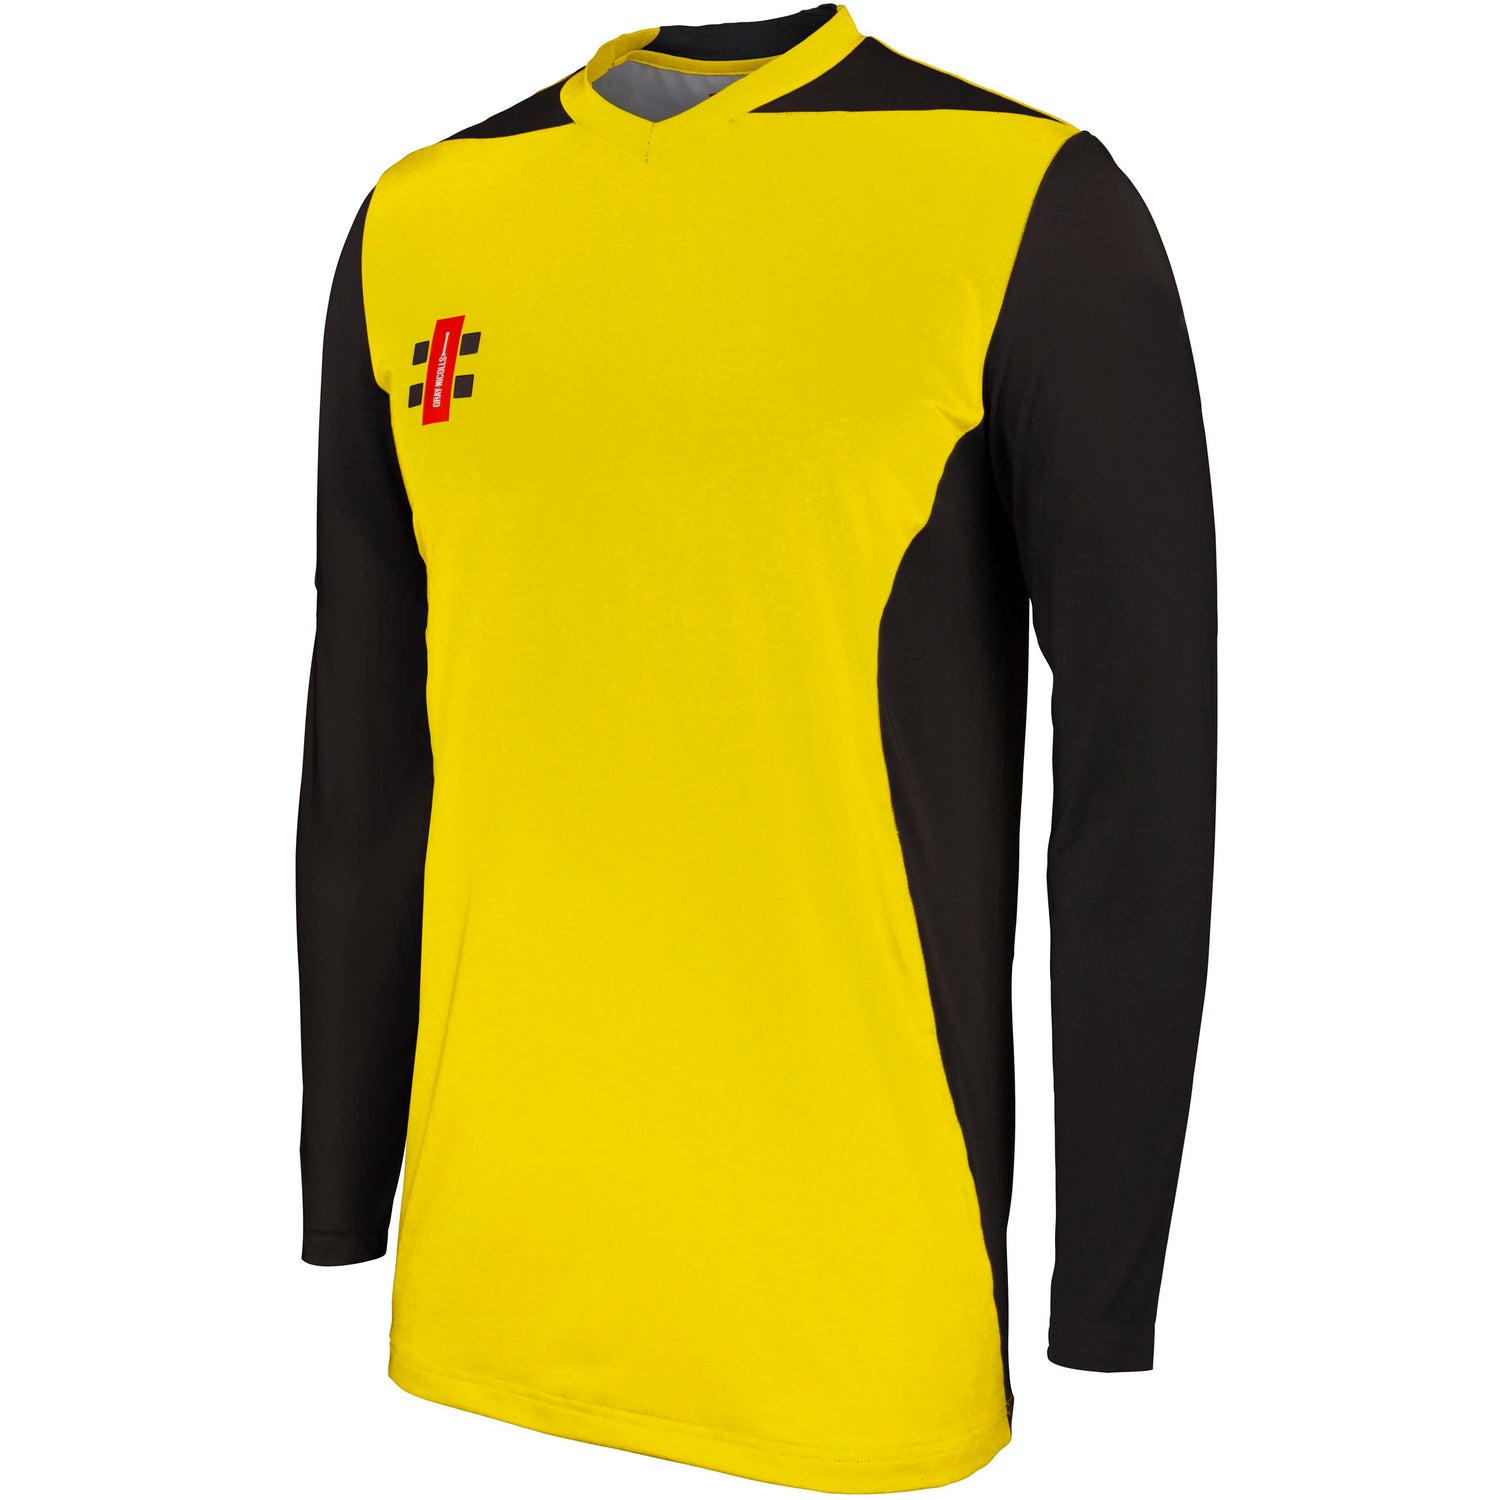 black and yellow cricket jersey